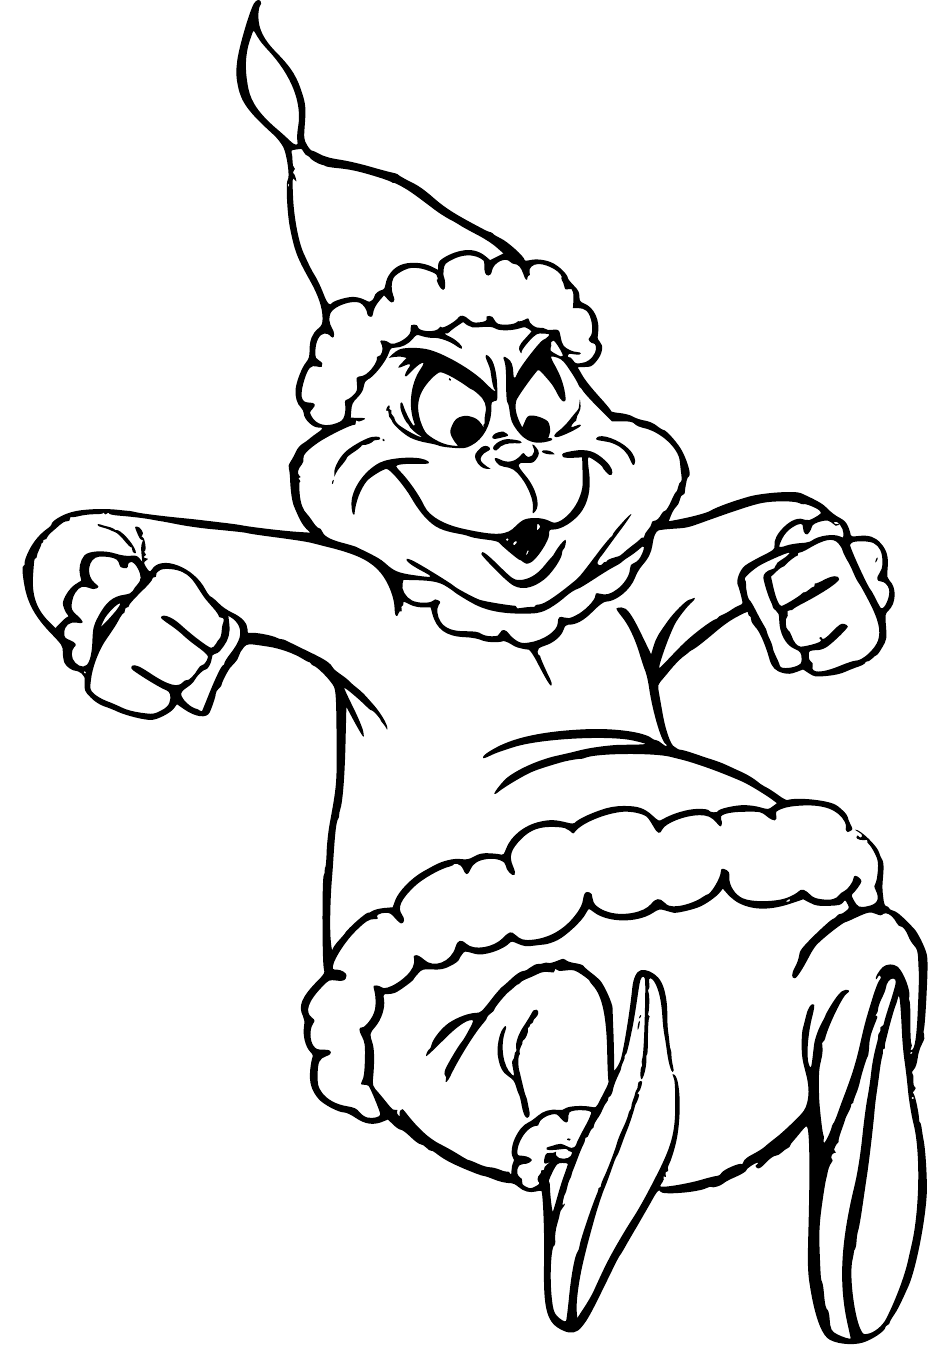 Jumping Grinch Coloring Page